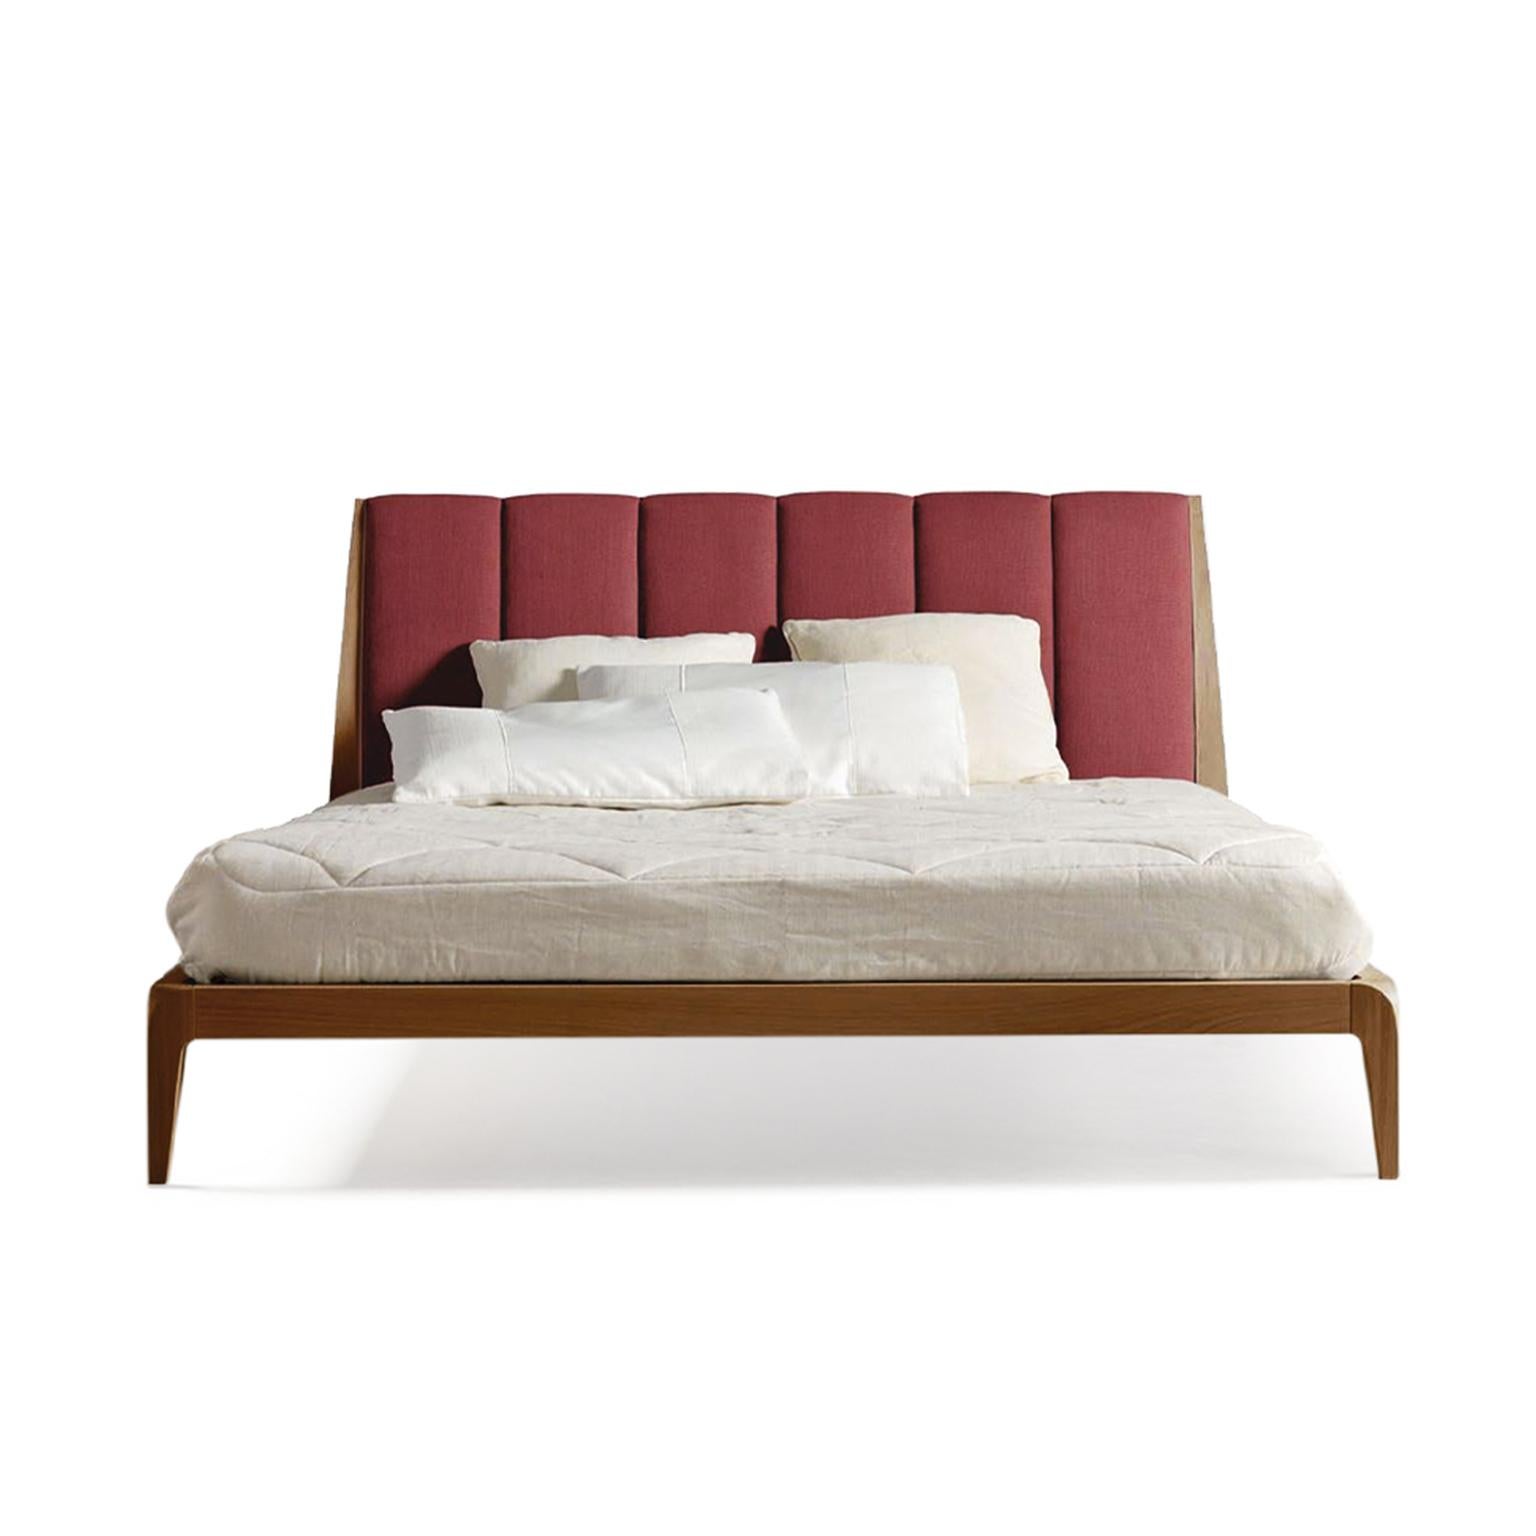 Verso Nord Solid Wood Bed, Walnut in Hand-Made Natural Finish, Contemporary For Sale 1